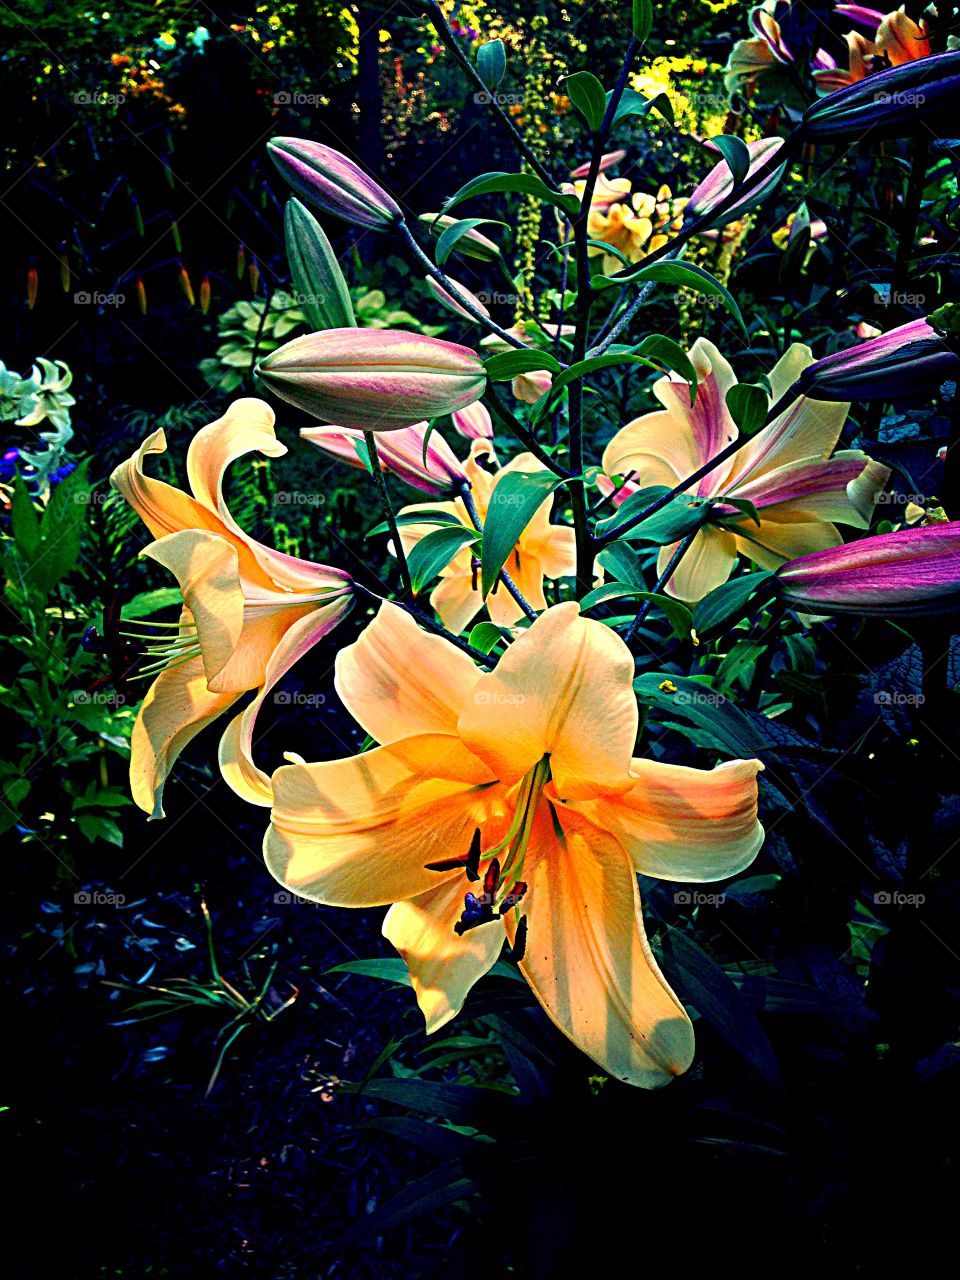 Sunset Asiatic Lilies. Lilies blooming in sunset light